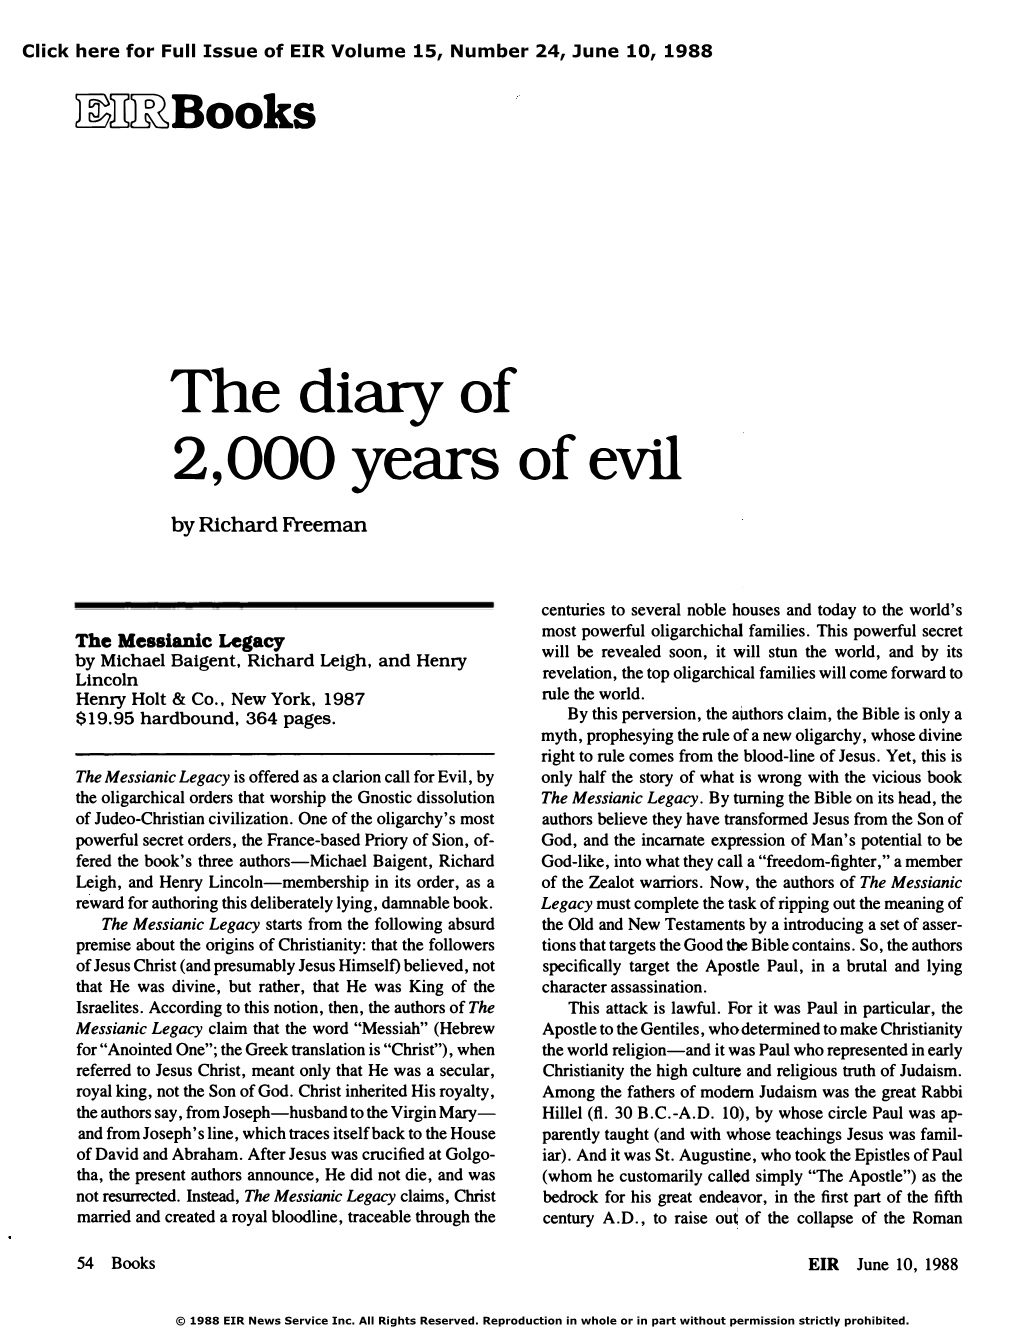 The Diary of 2,000 Years of Evil